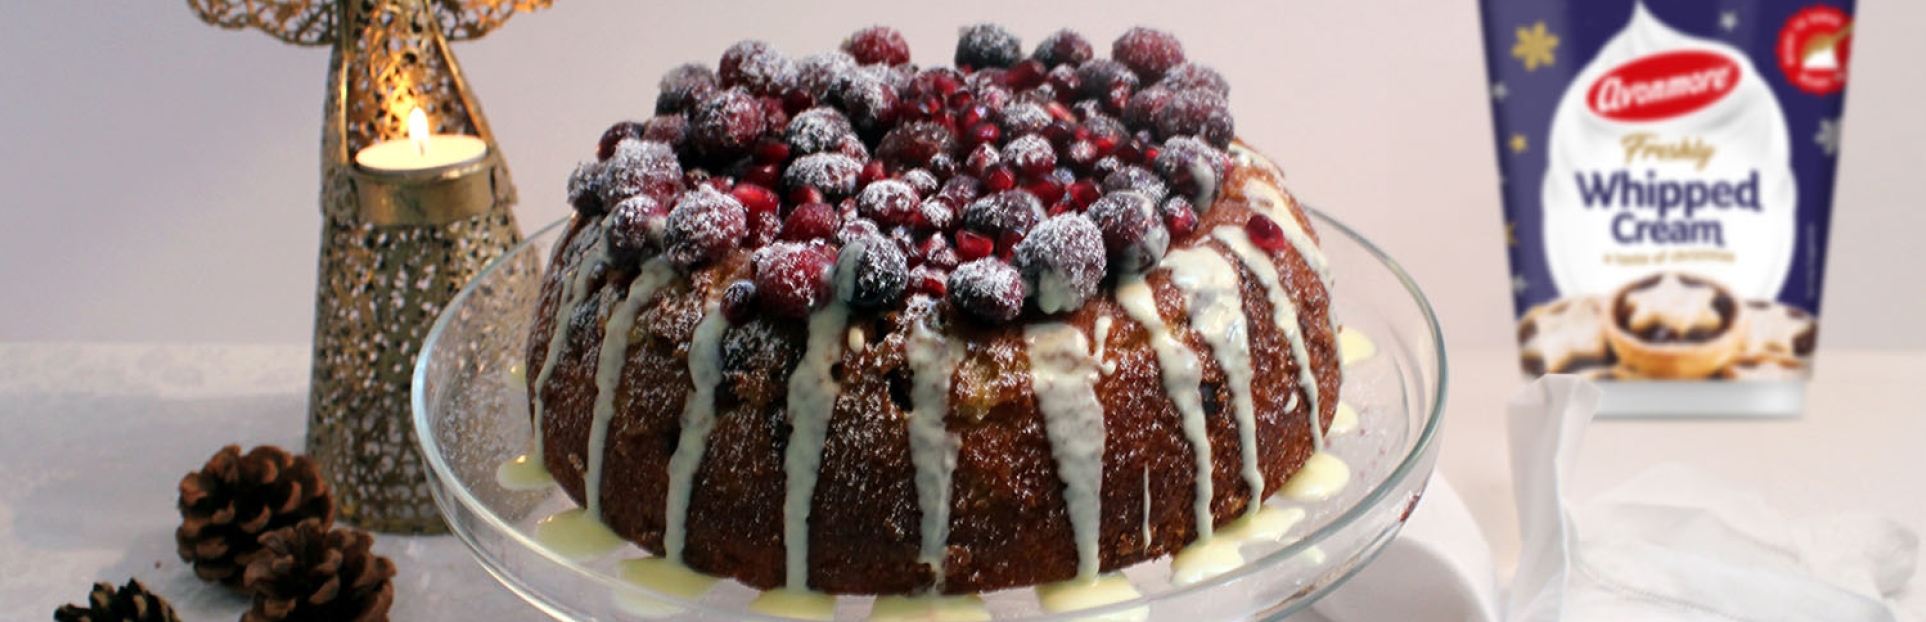 Sparkling Cranberry and White Chocolate Bundt Cake